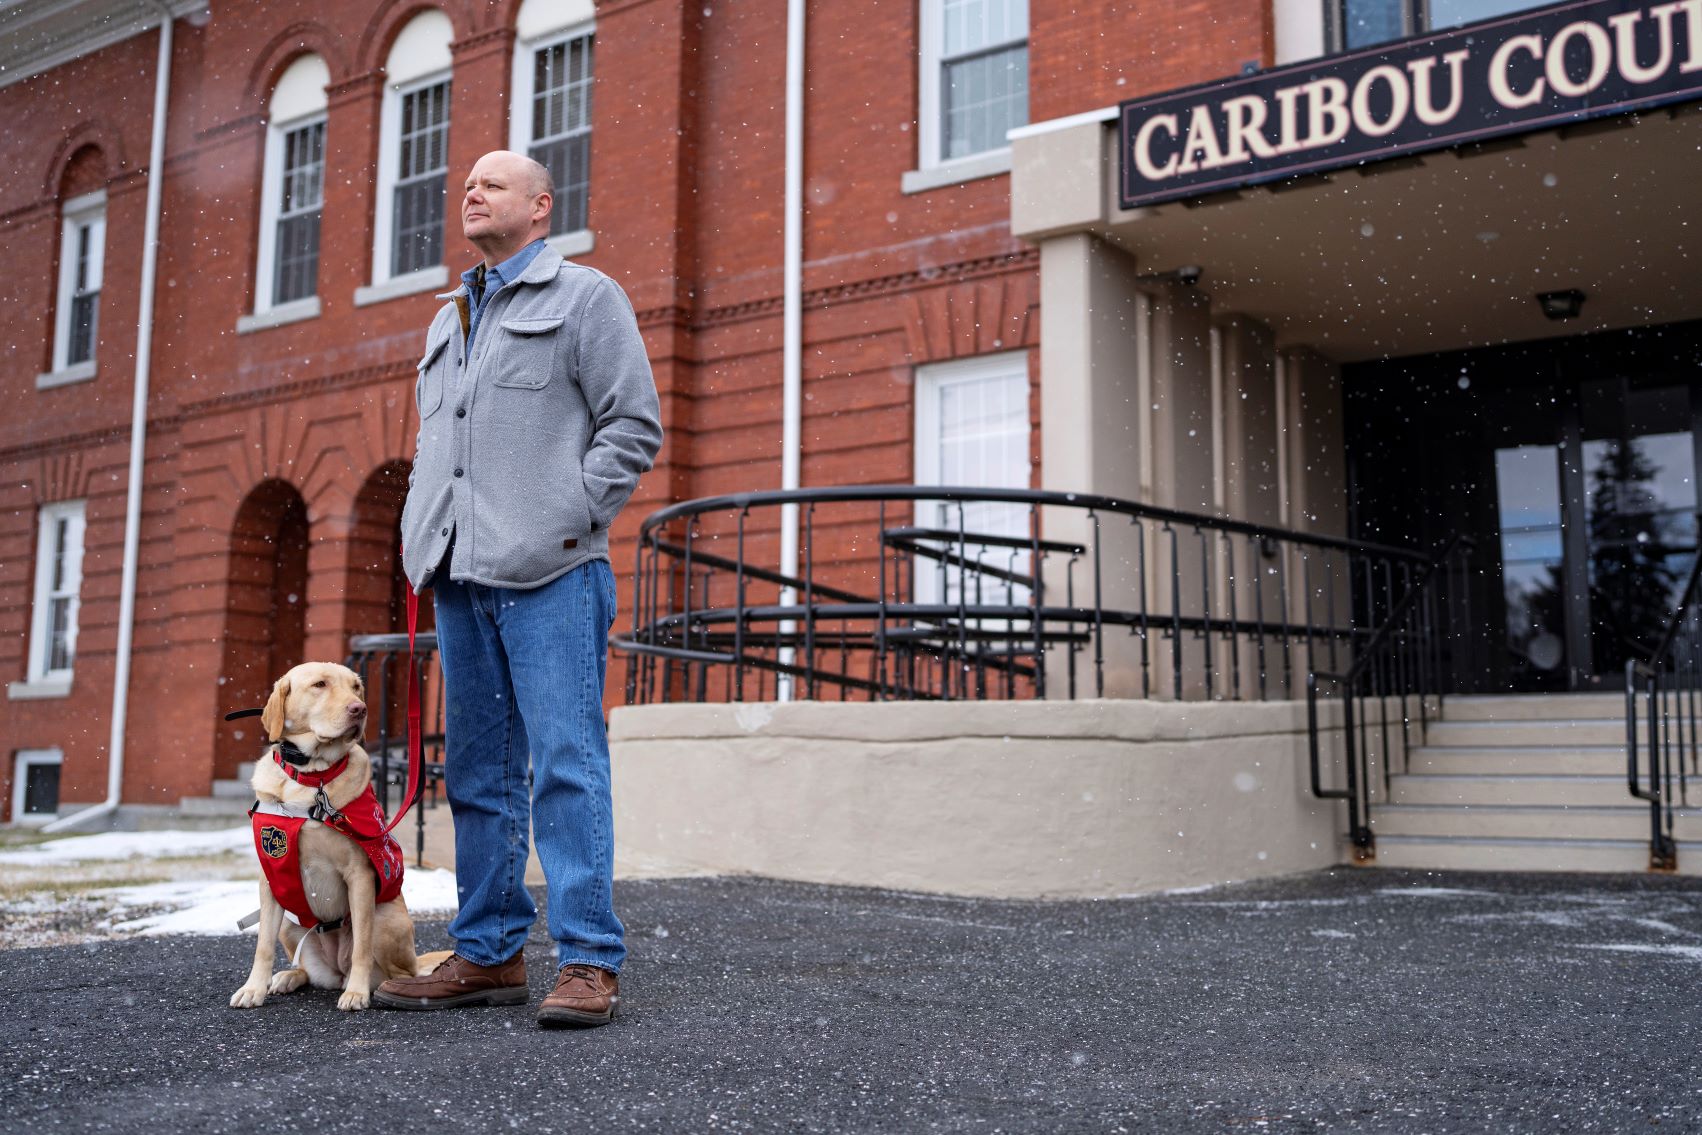 Todd Collins poses for a photo, while holding the leash to his dog, outside a courthouse.